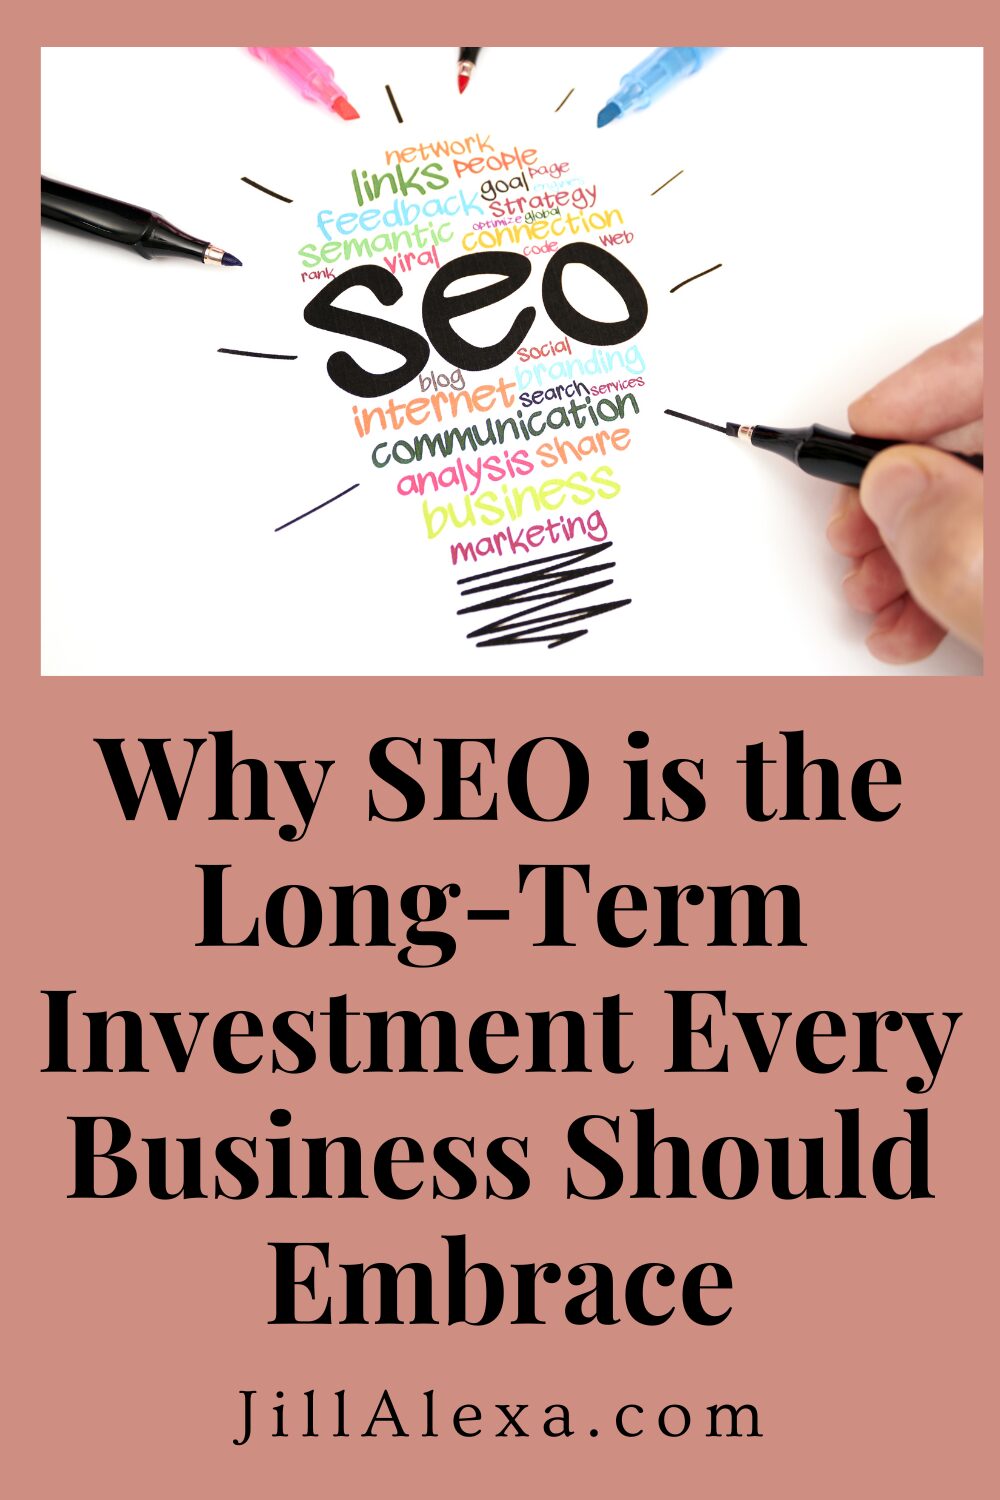 8 Major reasons why SEO is not just a one-time effort but a strategic, ongoing investment that every business should embrace.